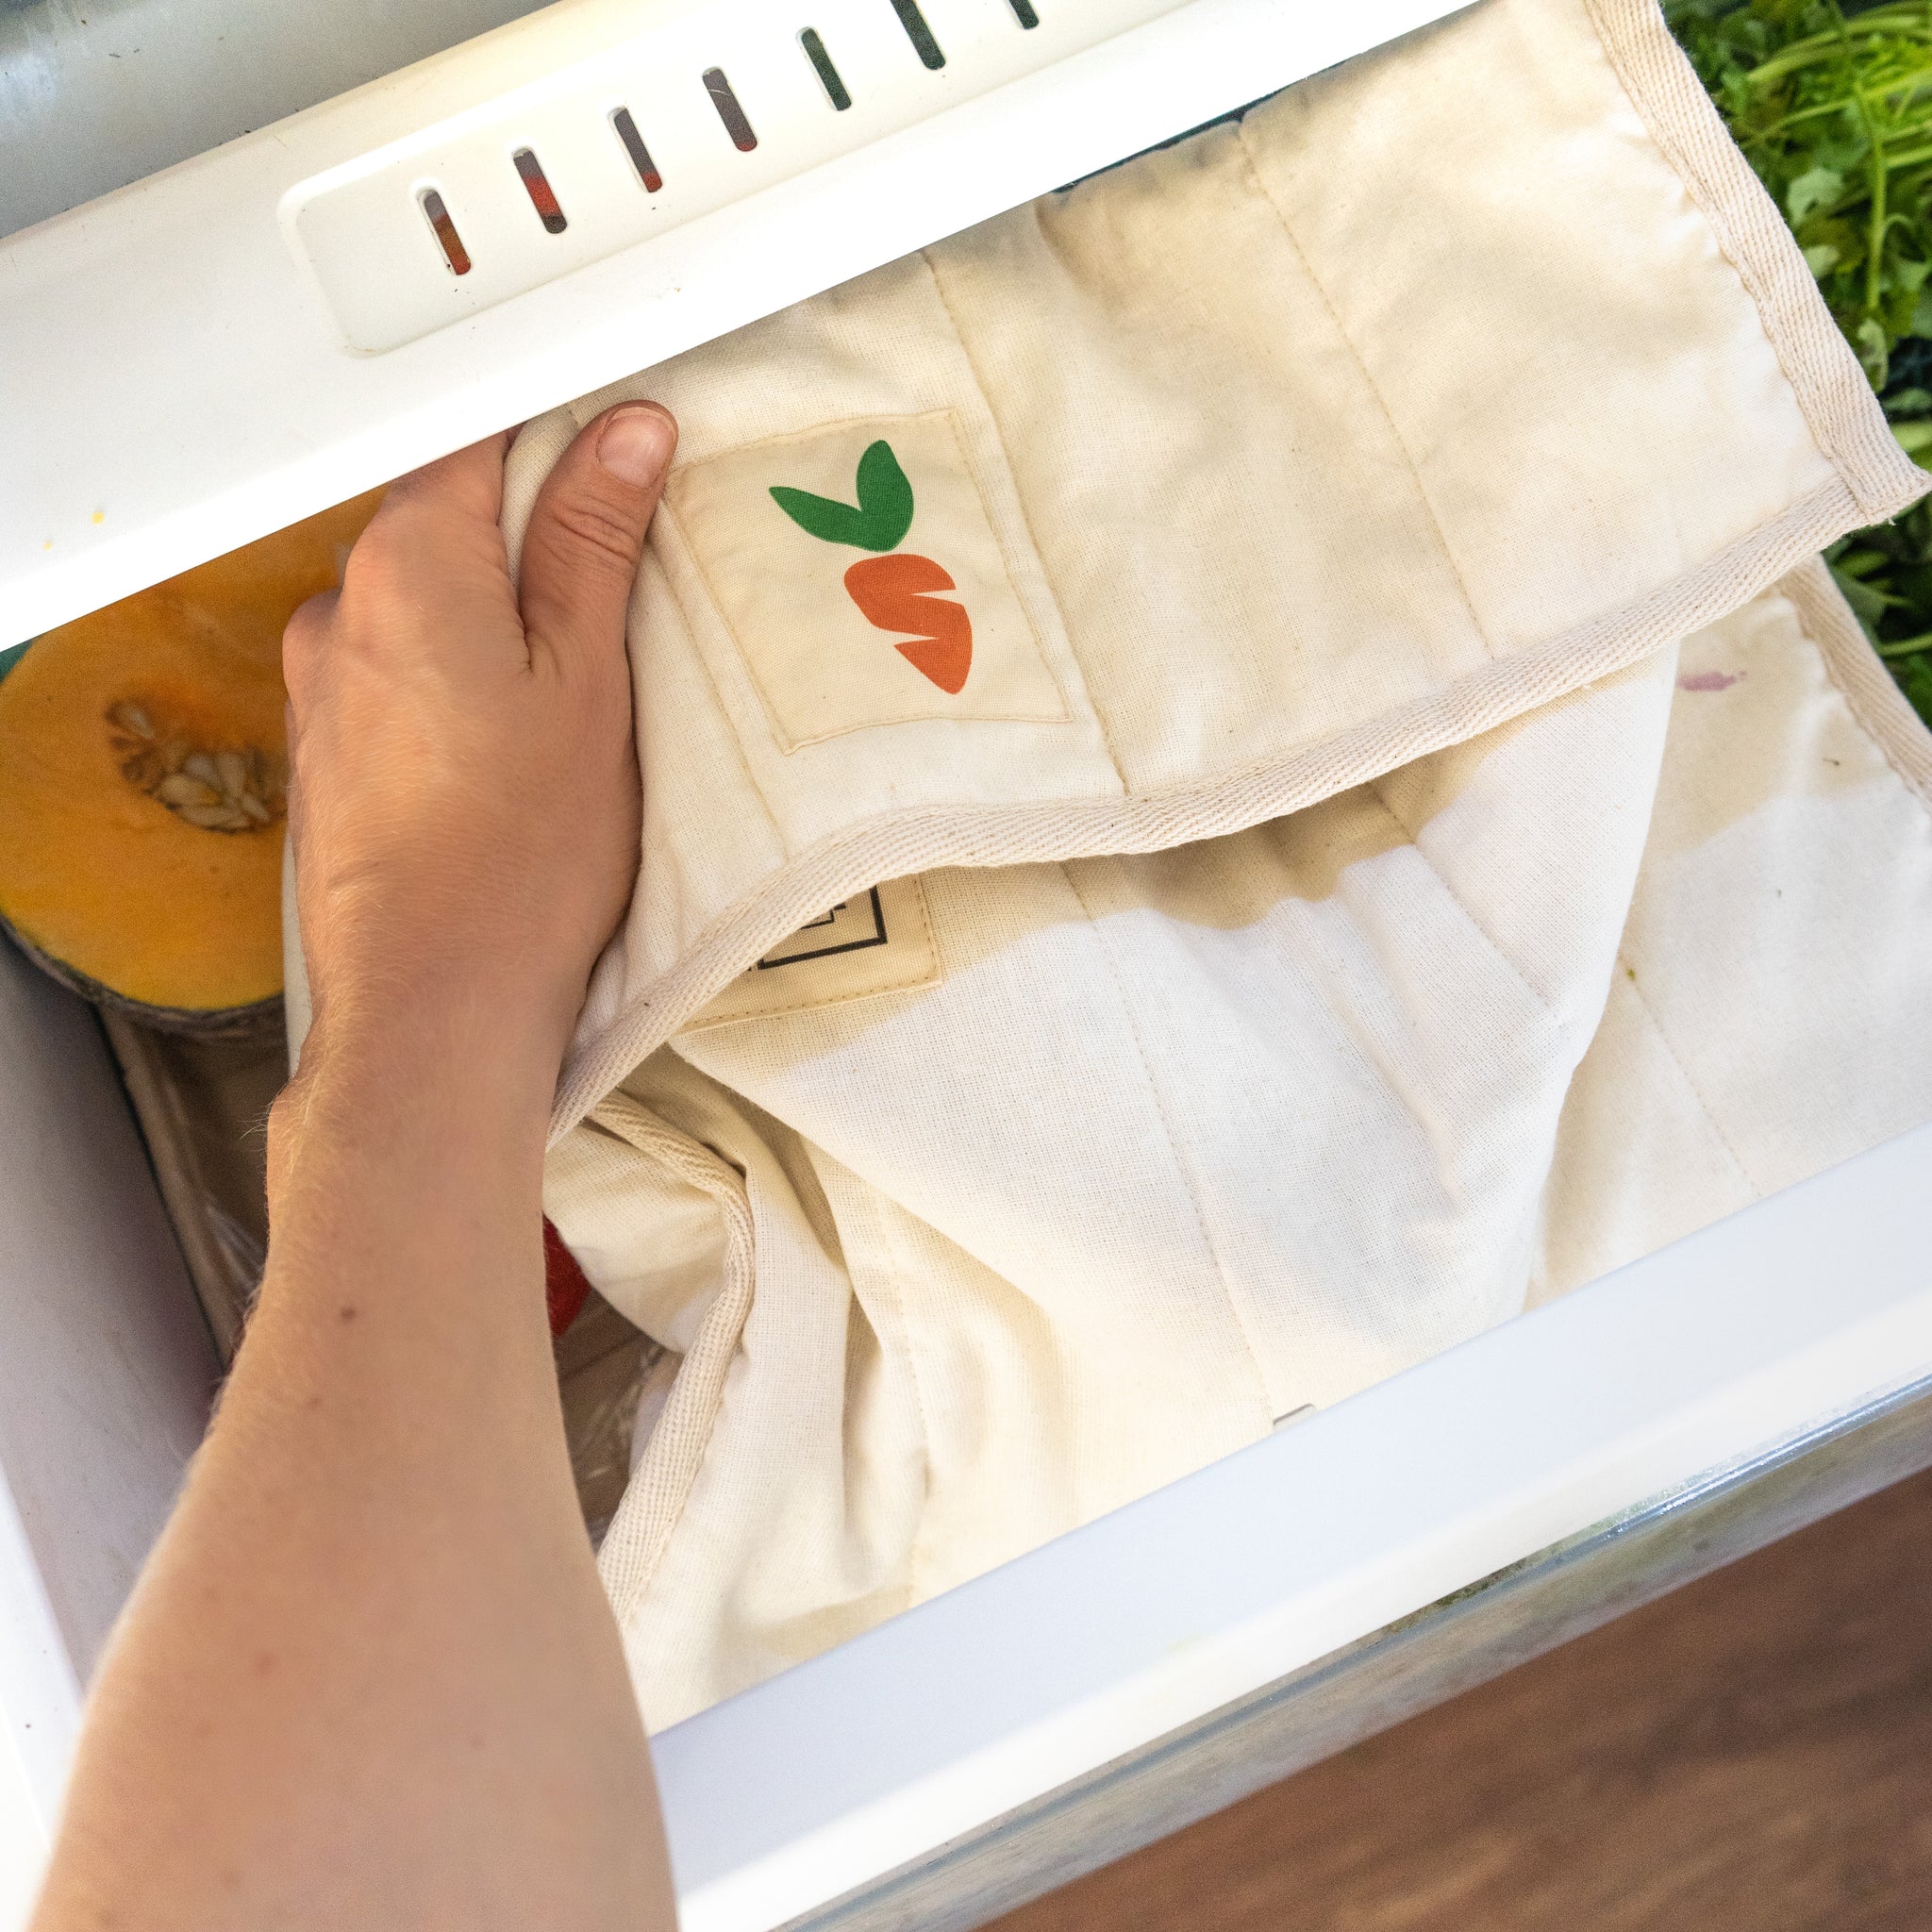 Brightly on Instagram: Tired of wasting produce? Us too, that's why we use  the Veggie Saver Produce Bag! 🥕 The Veggie Saver Produce Bag is  scientifically proven to keep fruits and vegetables